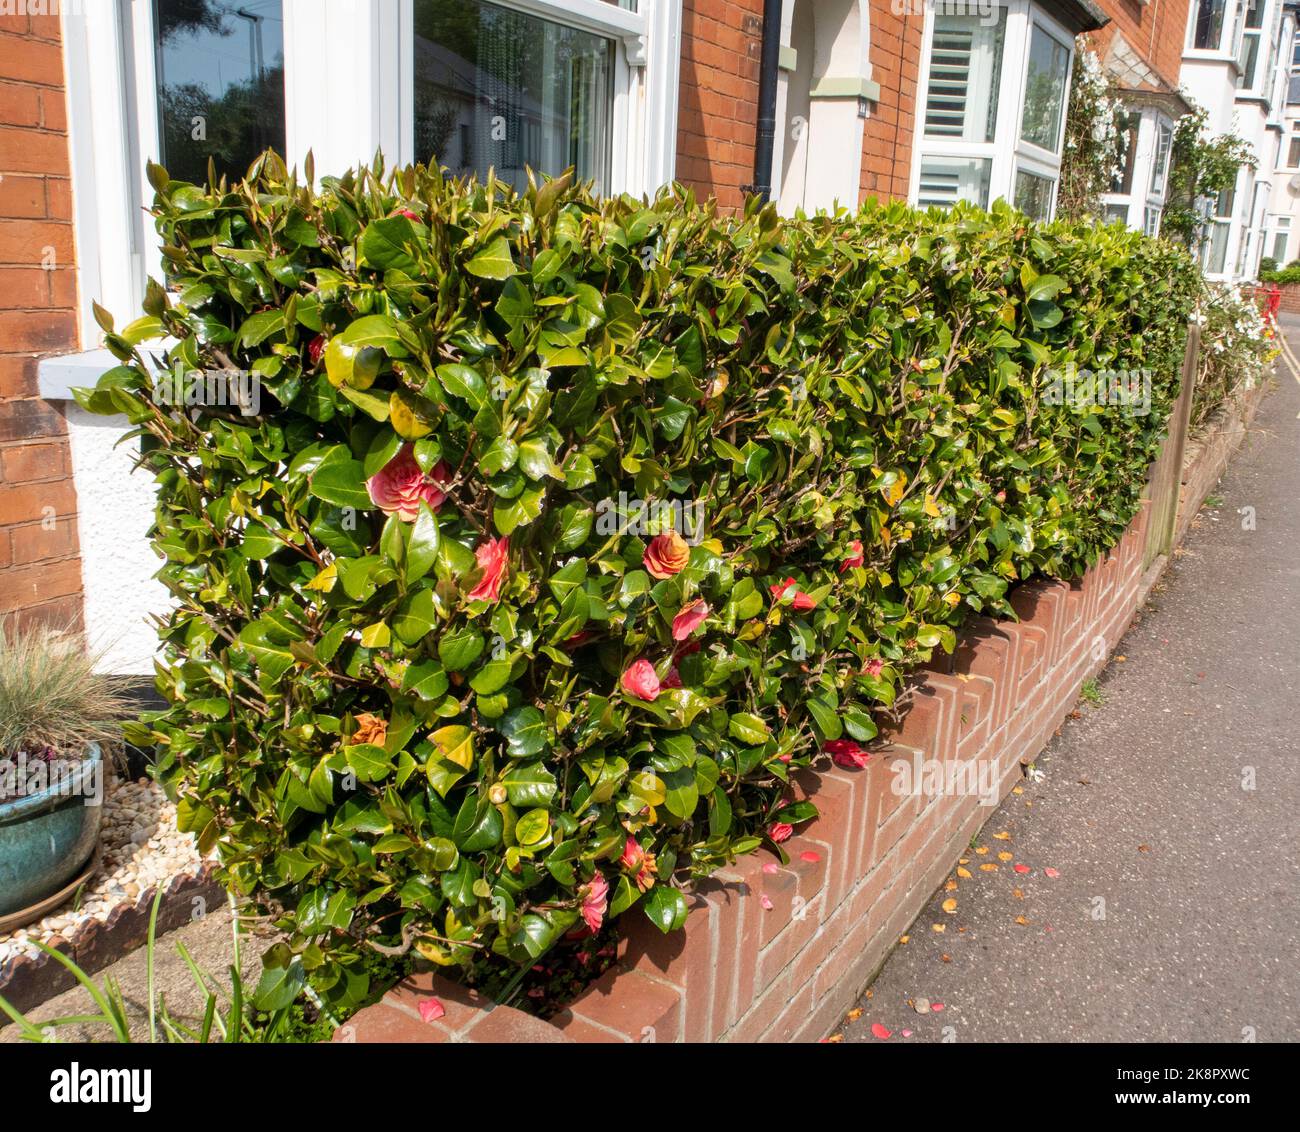 A camelia hedge in Sidmouth, Devon. Hedge made from camelia bushes Stock Photo